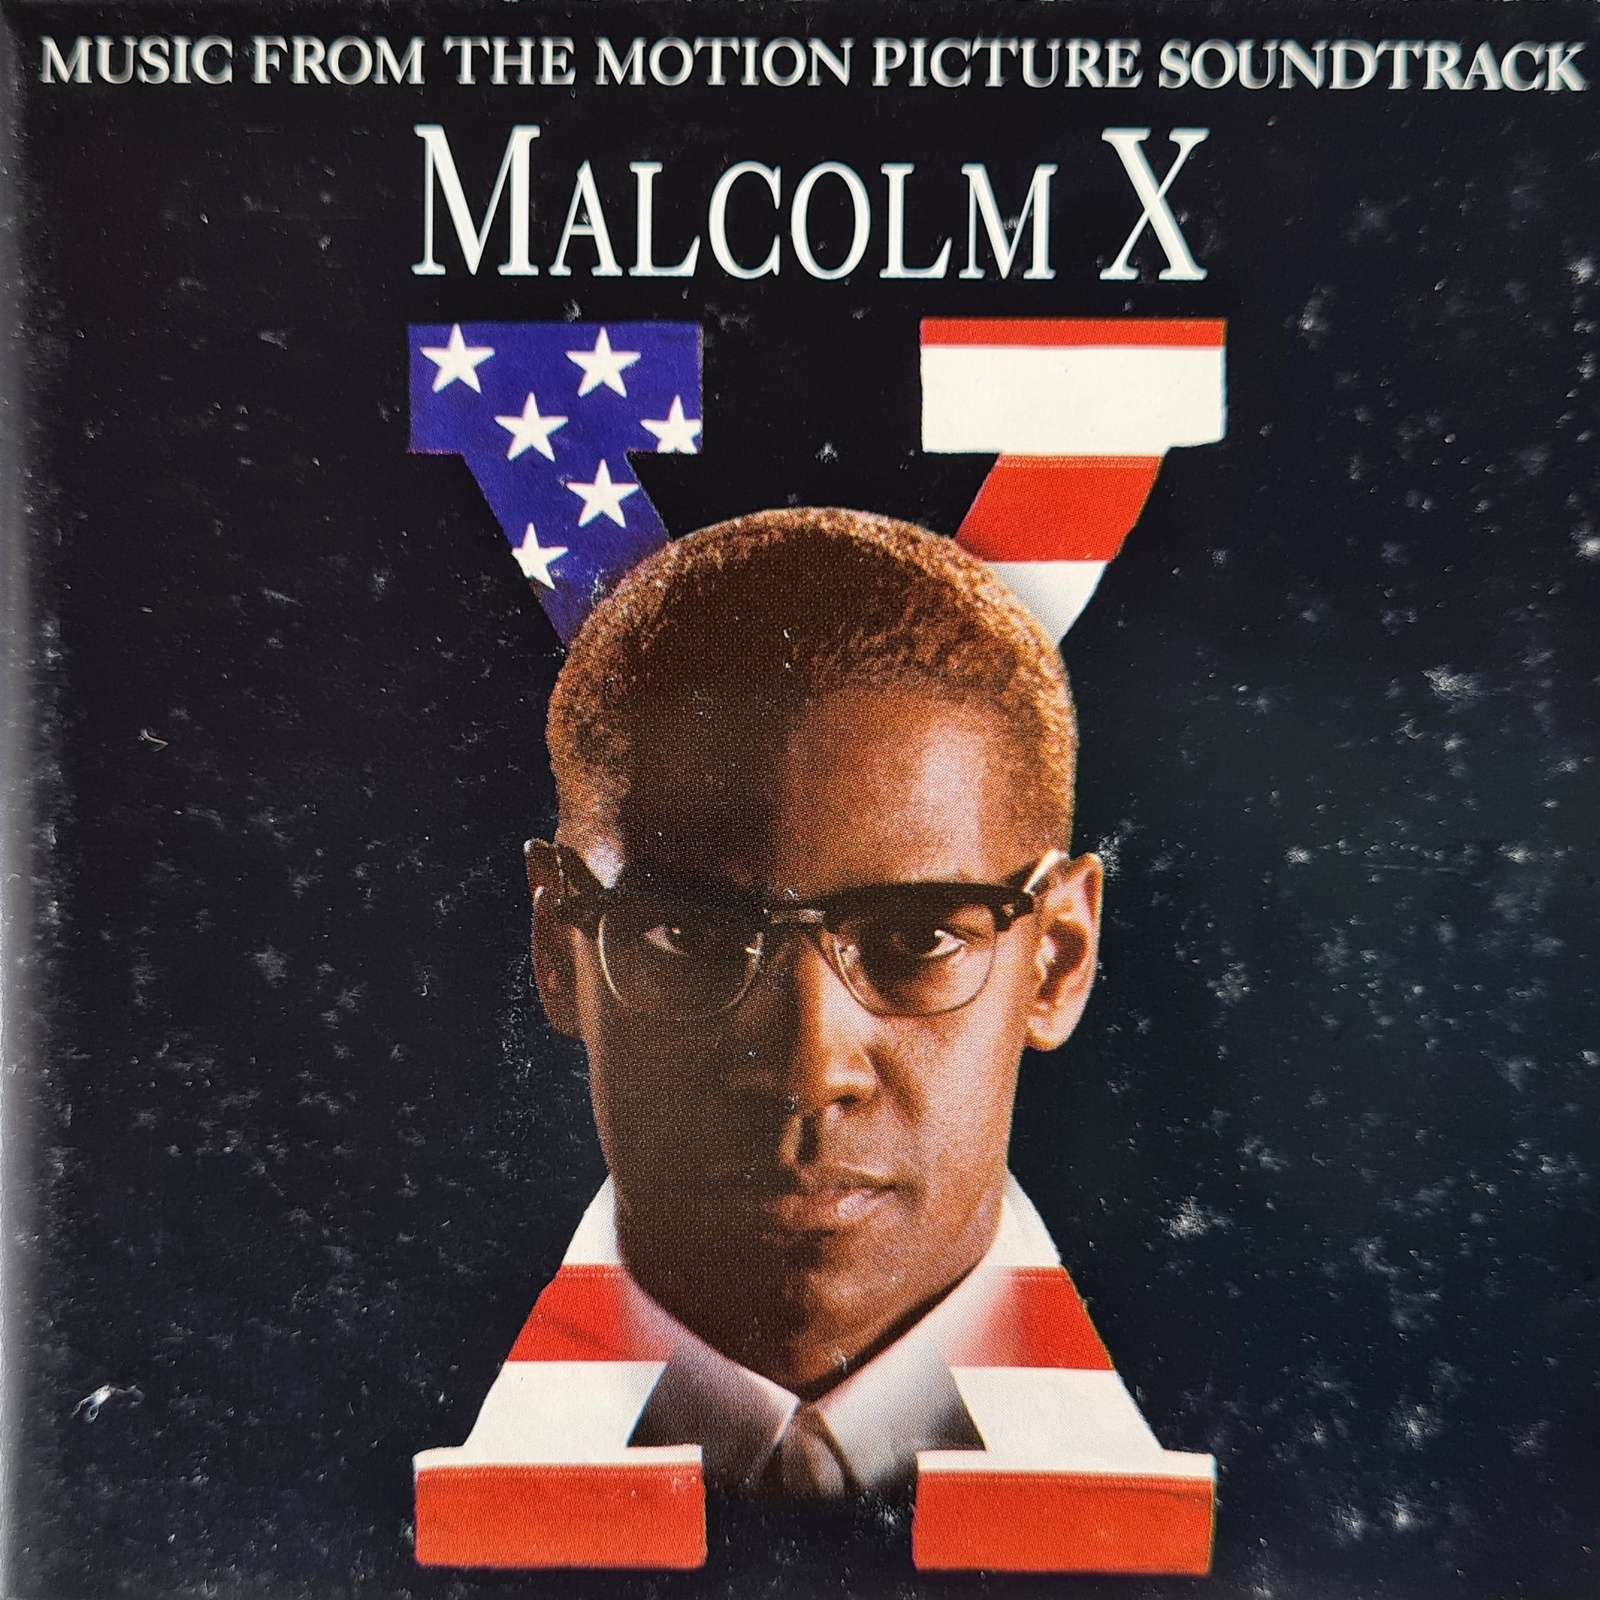 Malcolm X - Music from the Motion Picture Soundtrack (CD)